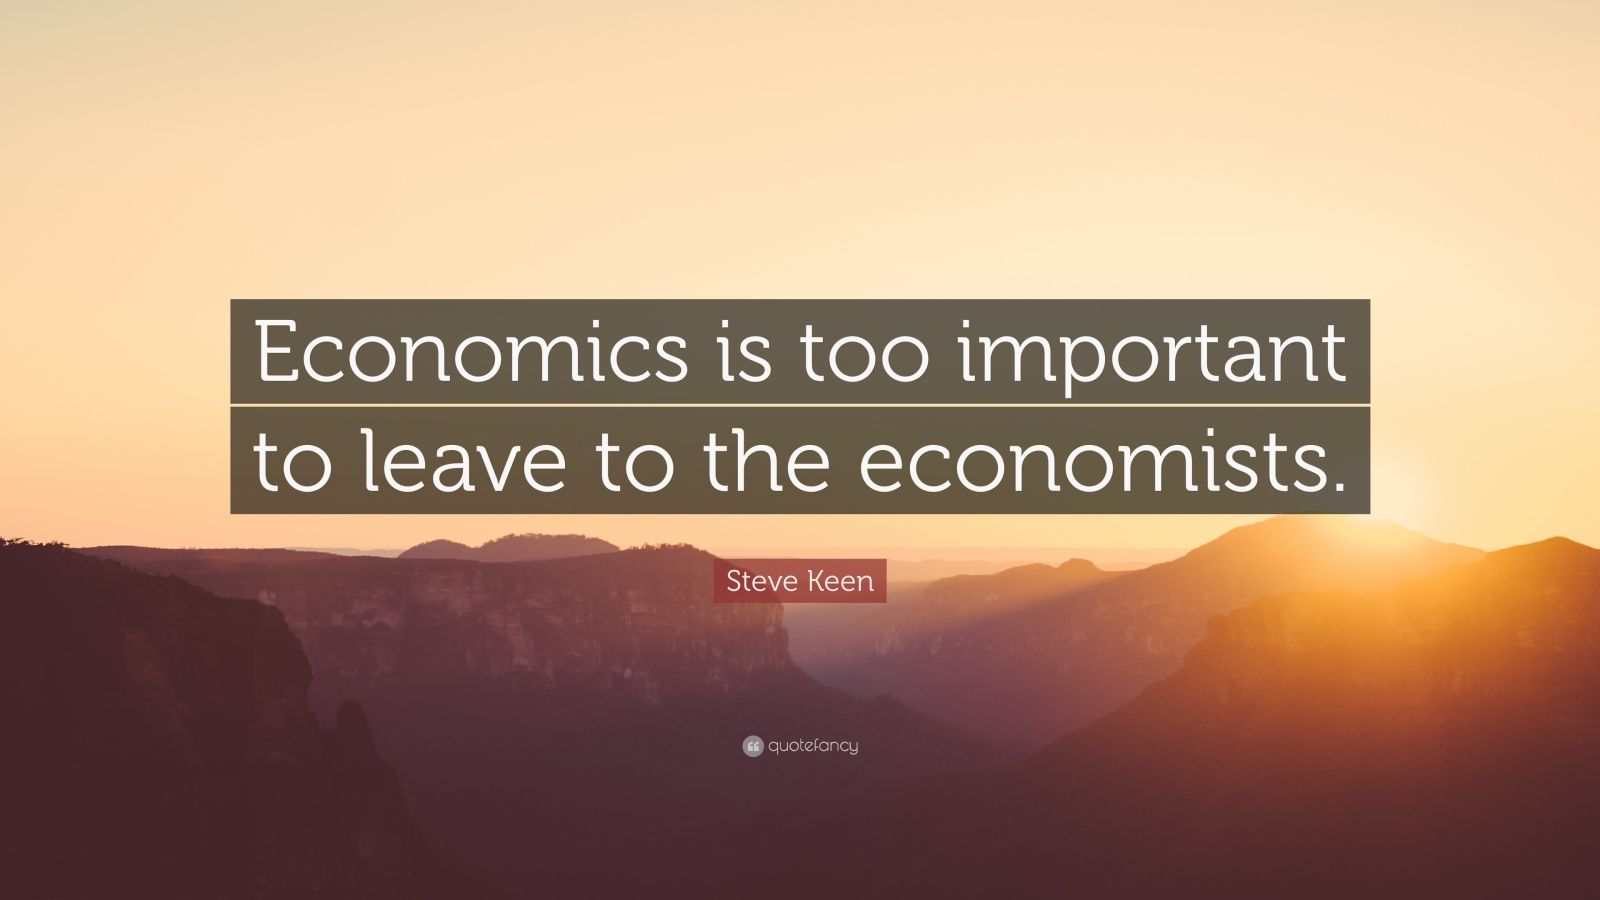 Steve Keen Quote “Economics is too important to leave to the